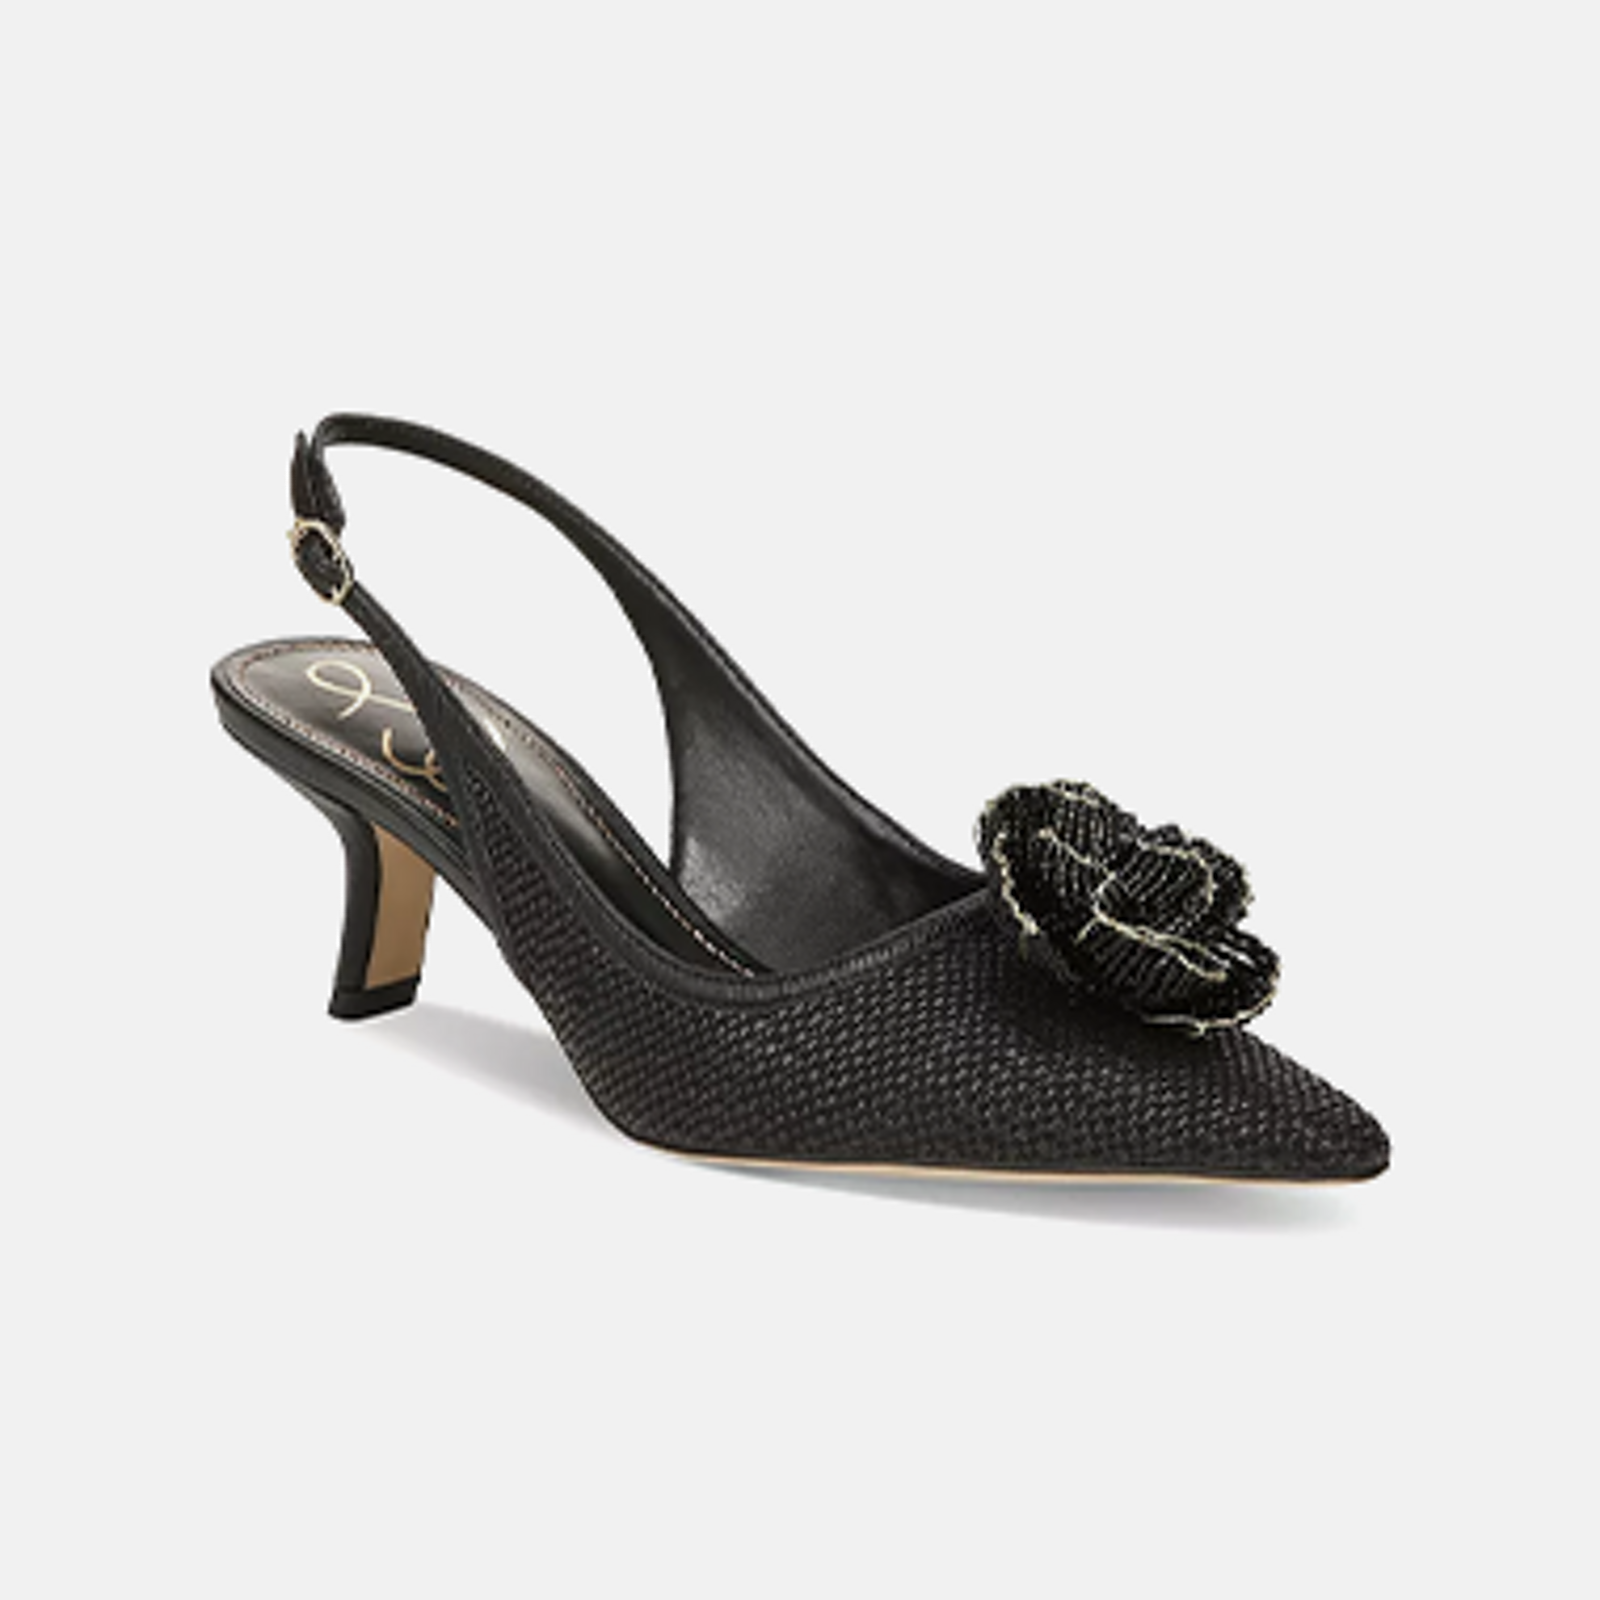 kate spade new york New Arrivals: Women's Shoes - Macy's